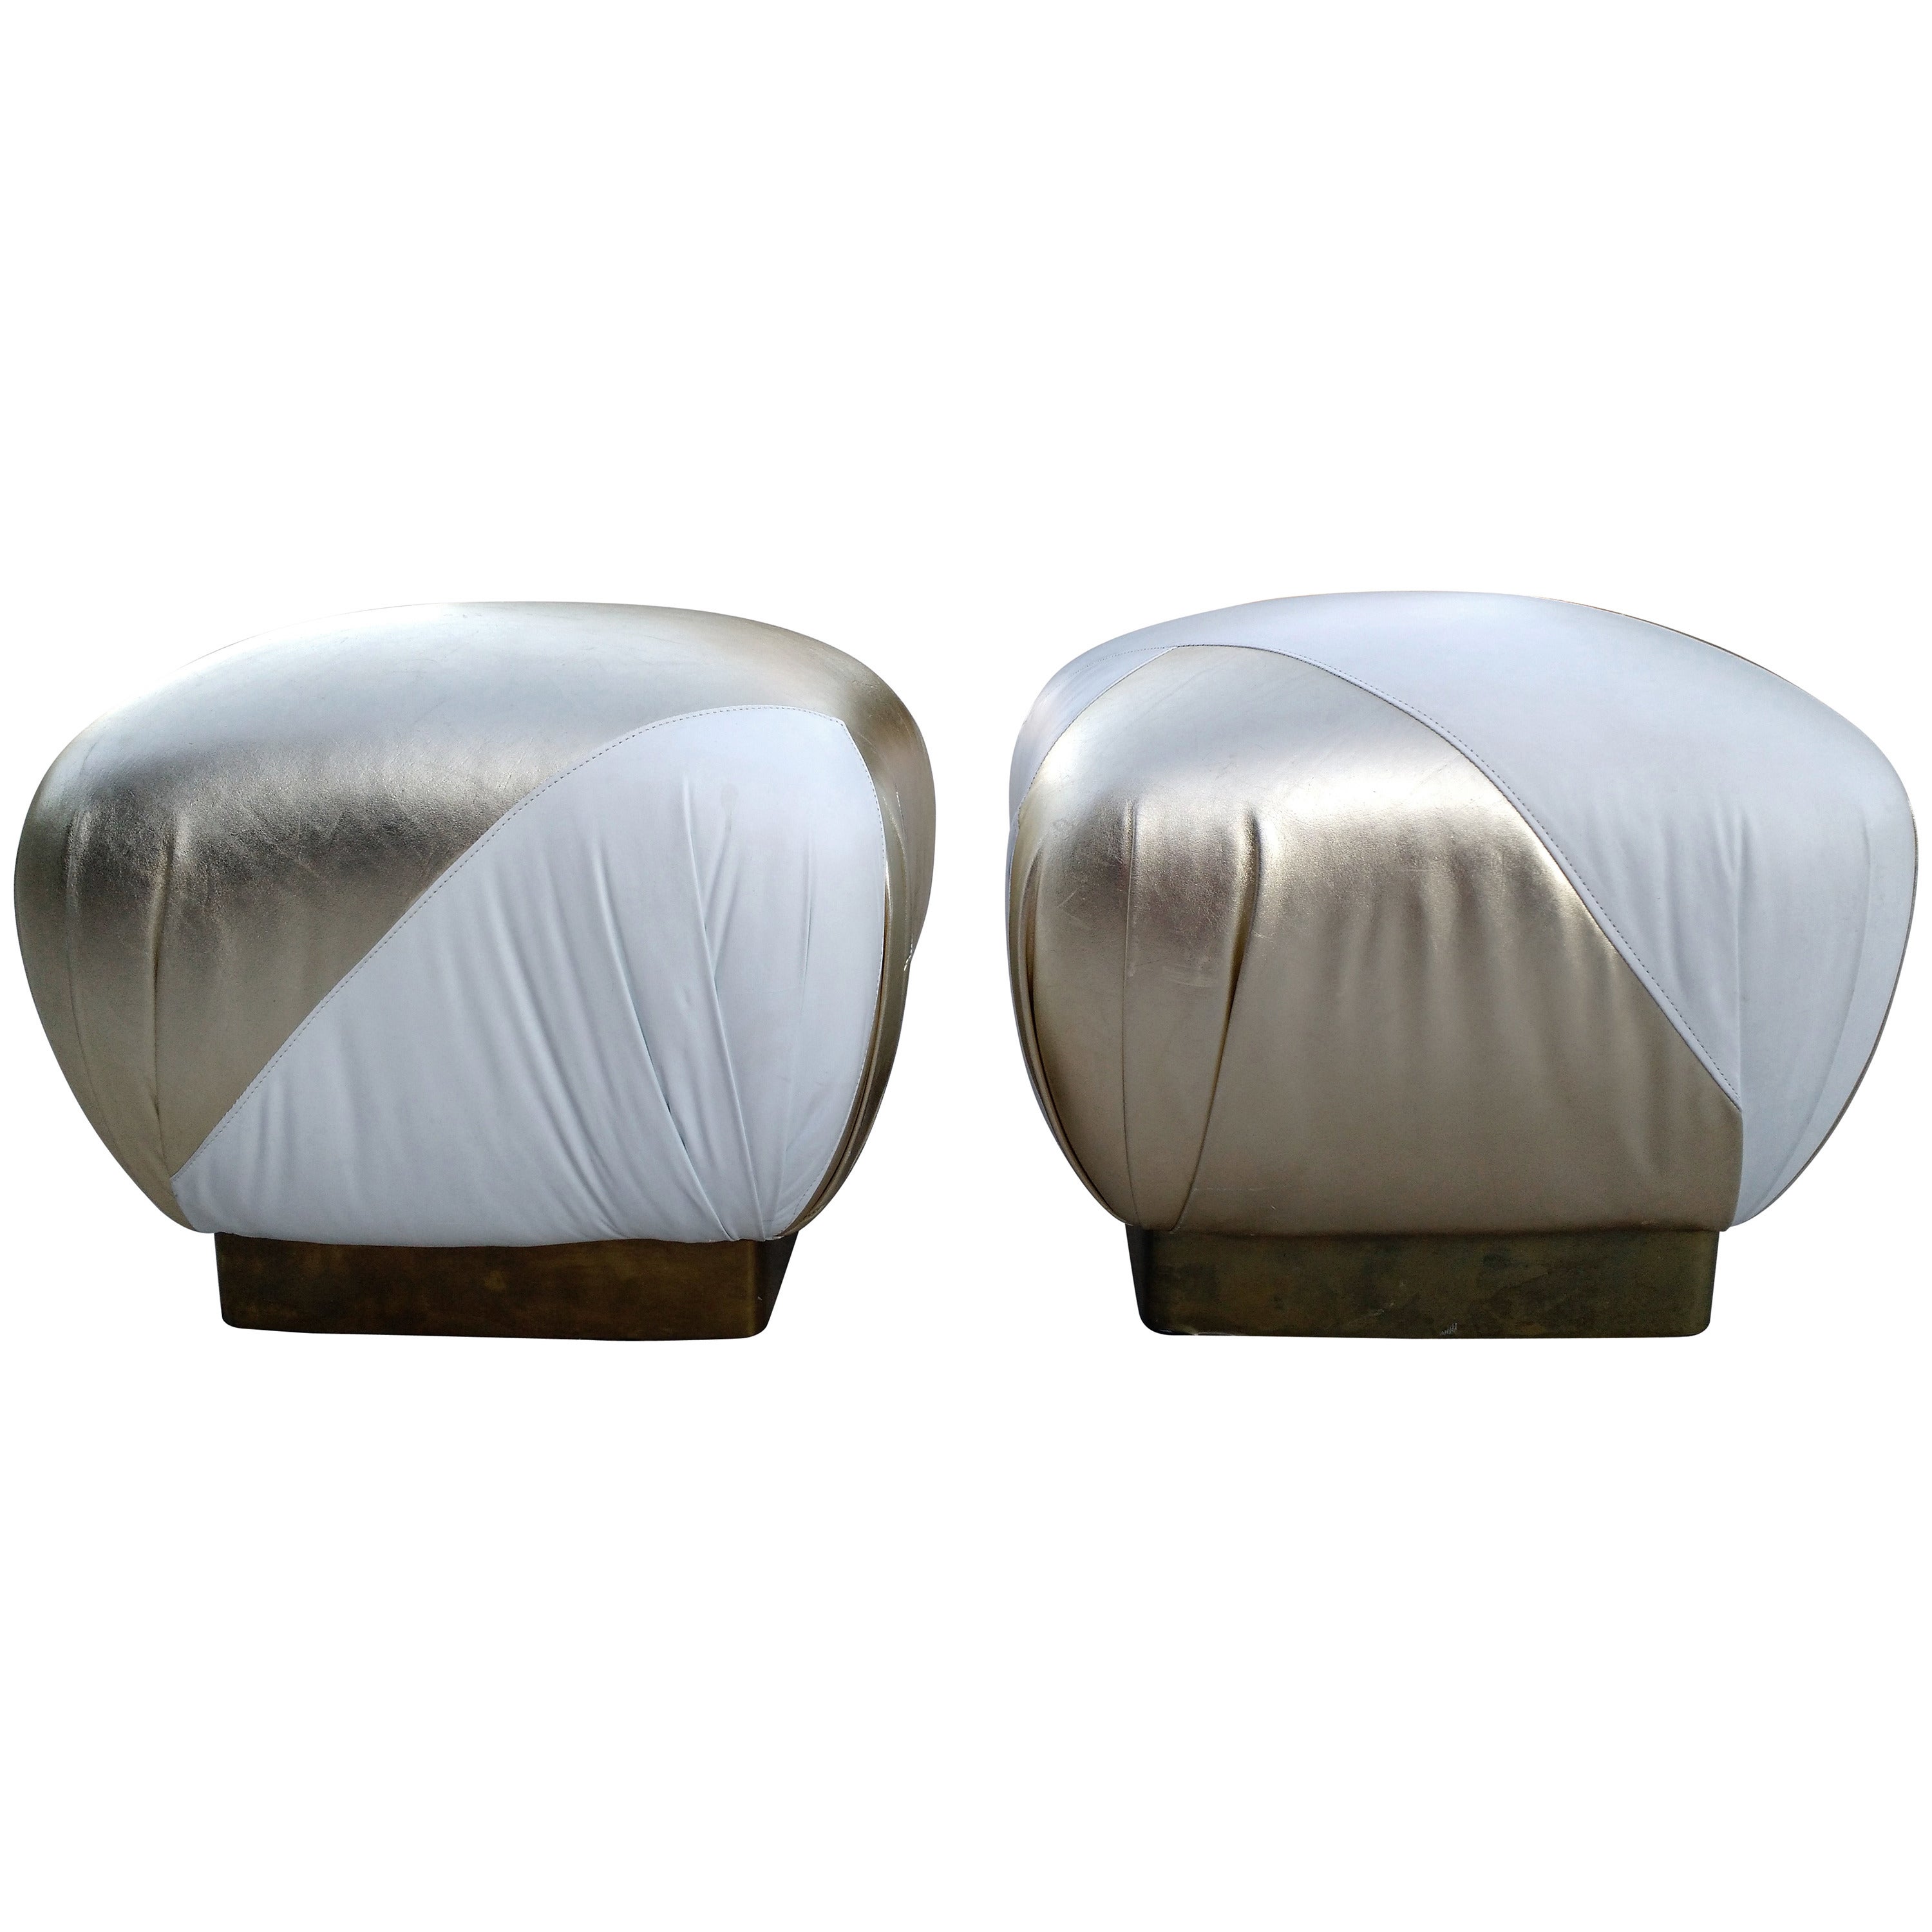 Hollywood Regency Pouf Ottomans in Gold and White Leather, Karl Springer Style